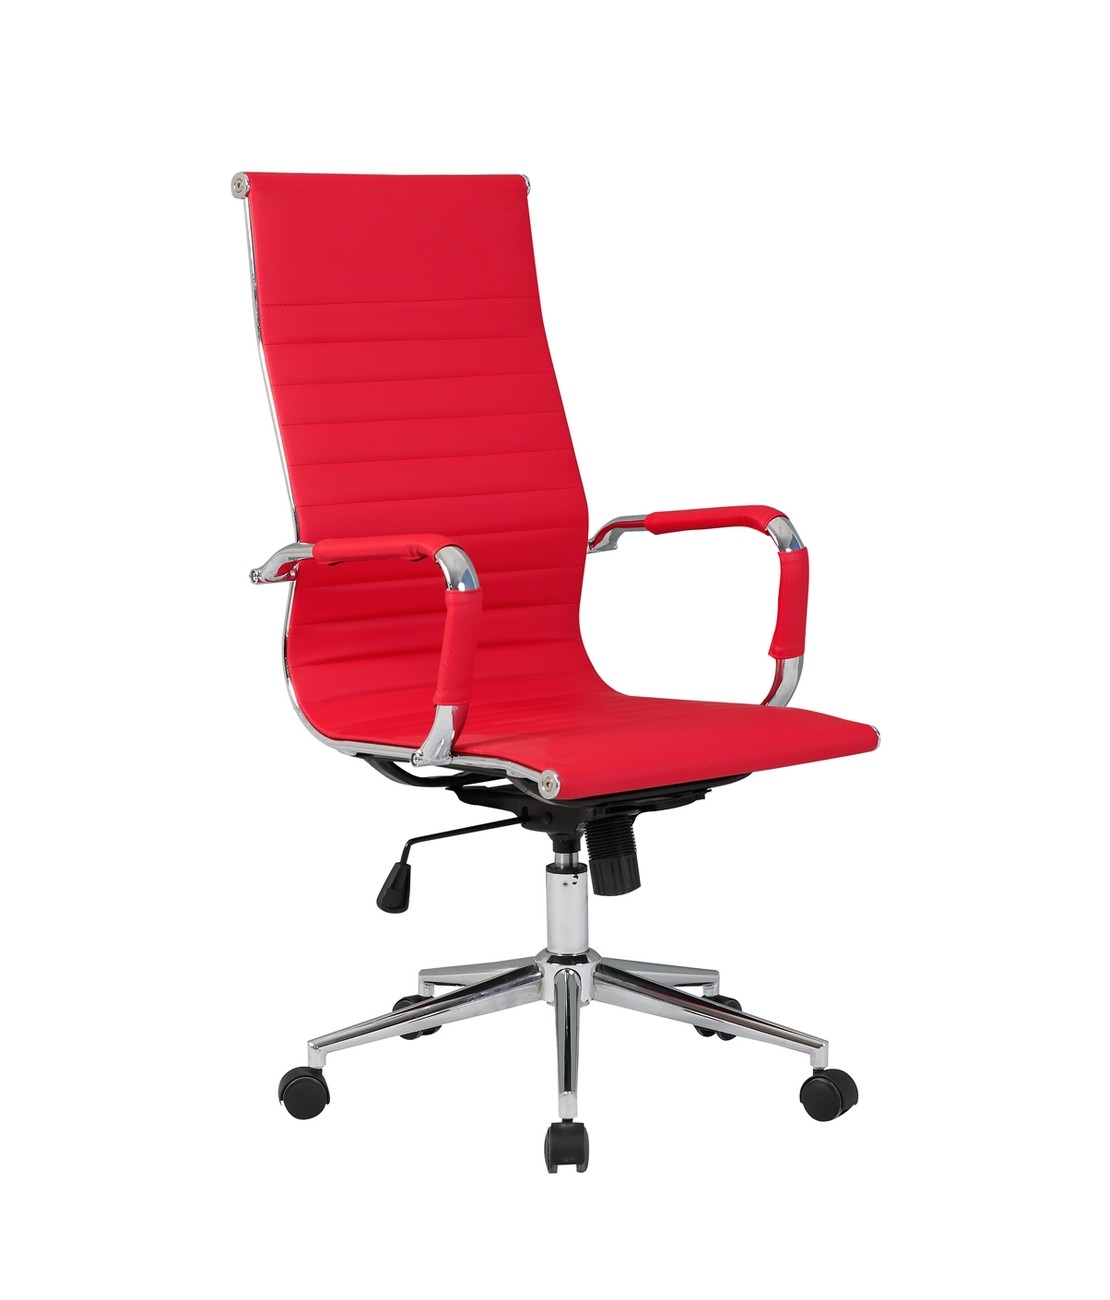 Ikke nok dosis sydvest Red Office Chairs - VisualHunt